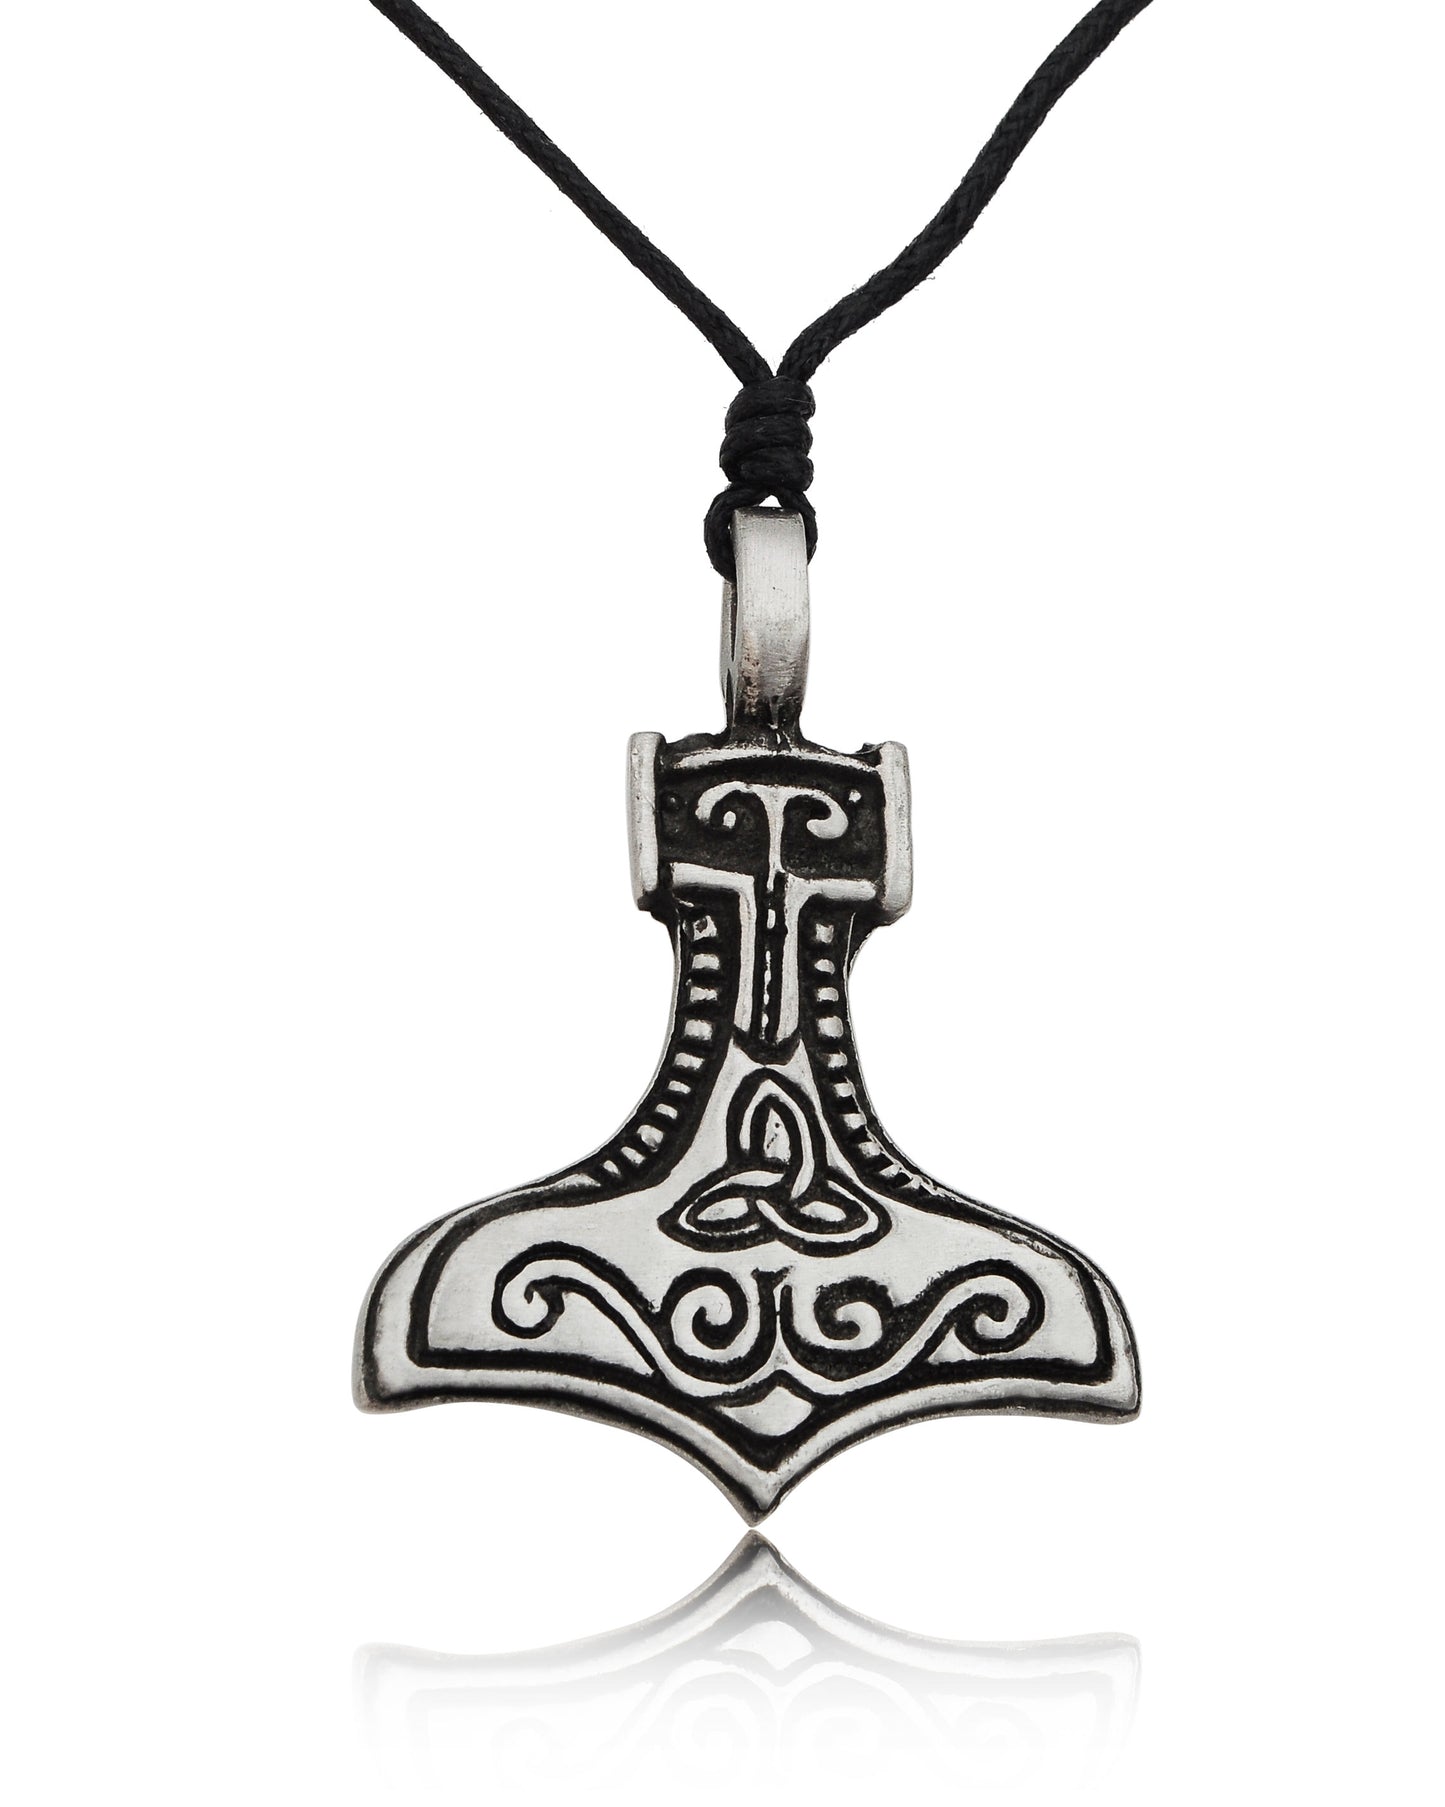 The Thor's Hammer Silver Pewter Charm Necklace Pendant Jewelry